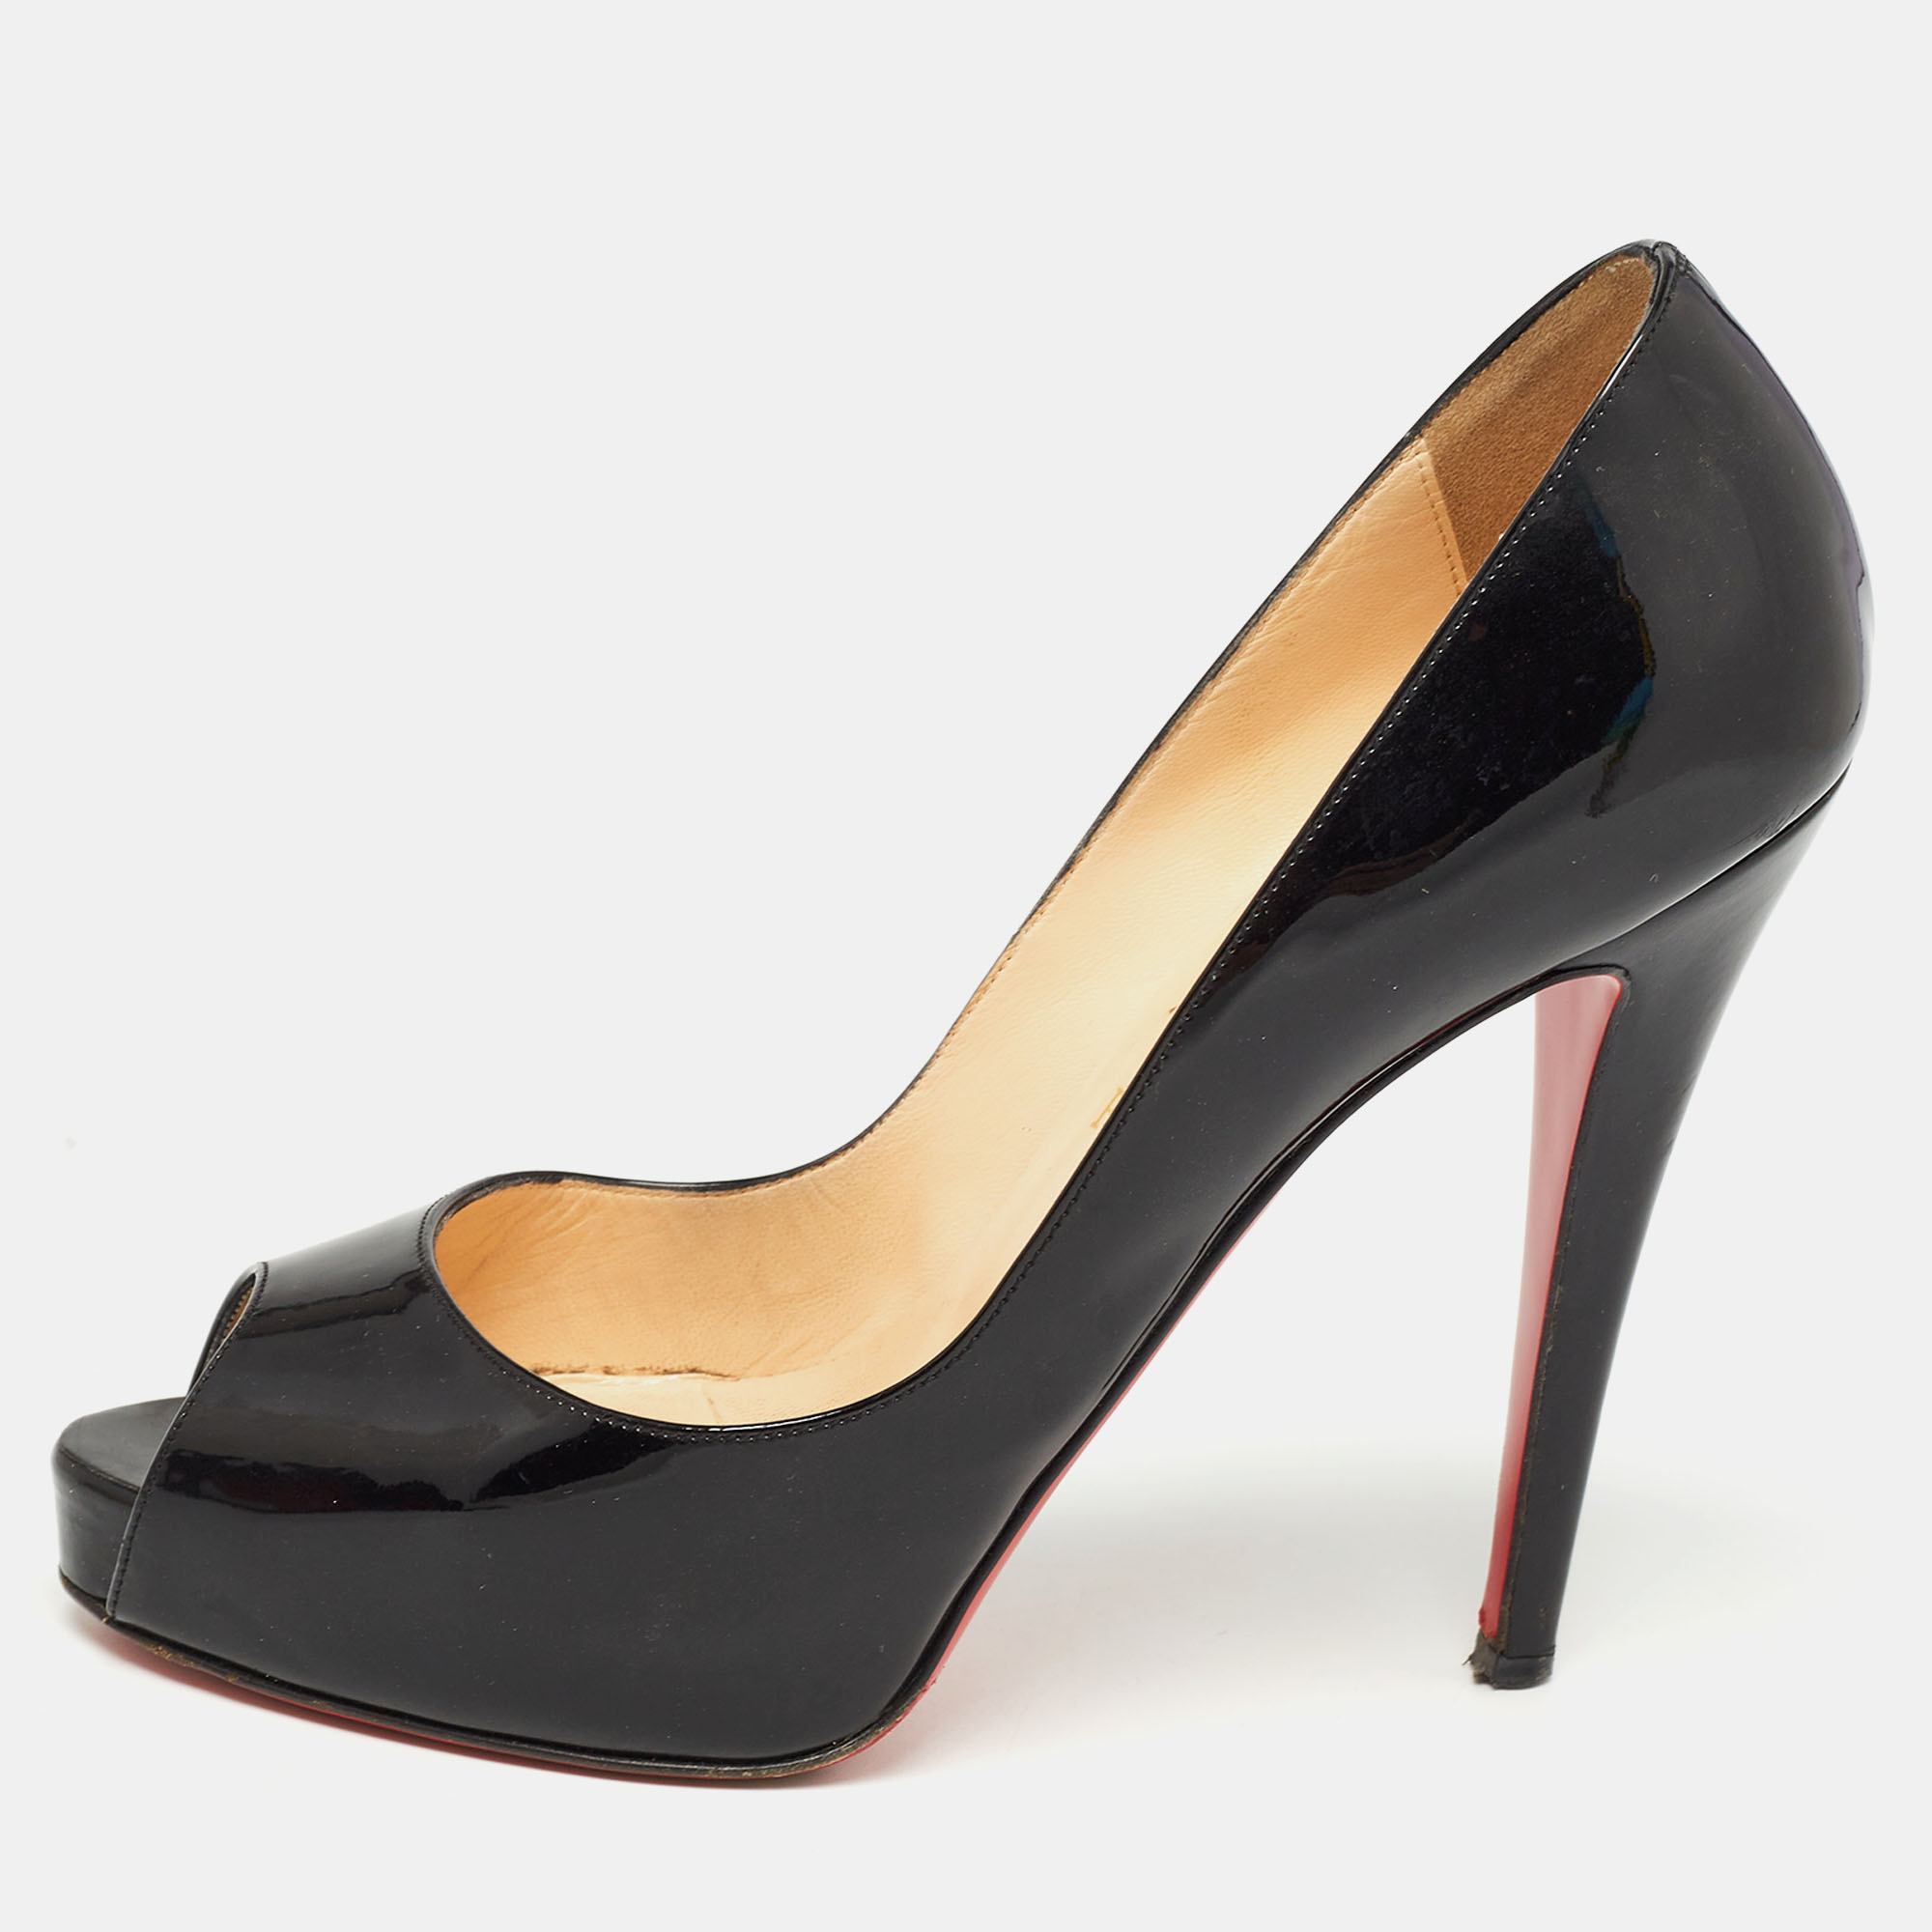 Christian louboutin black patent leather very prive pumps size 39